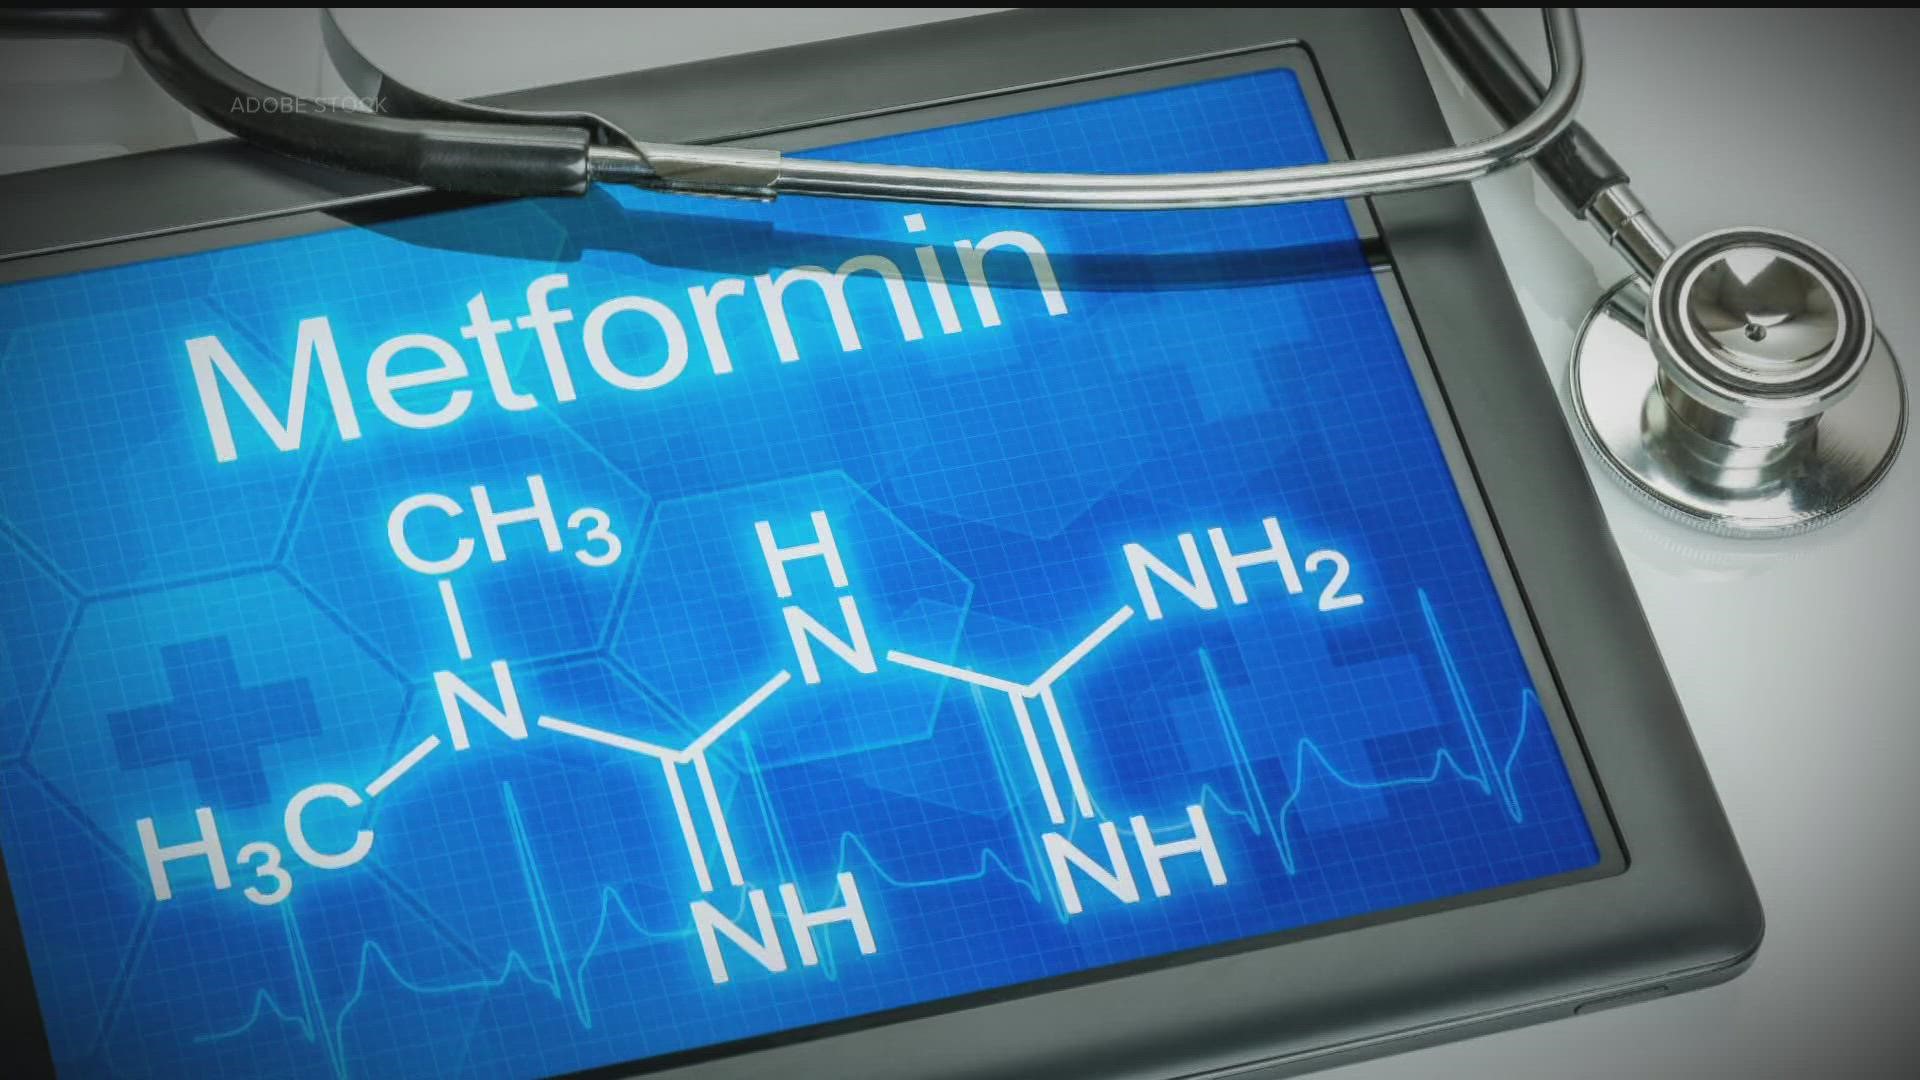 A trial led by researchers with the University of Minnesota Medical School found metformin could reduce the likelihood of severe COVID outcomes.